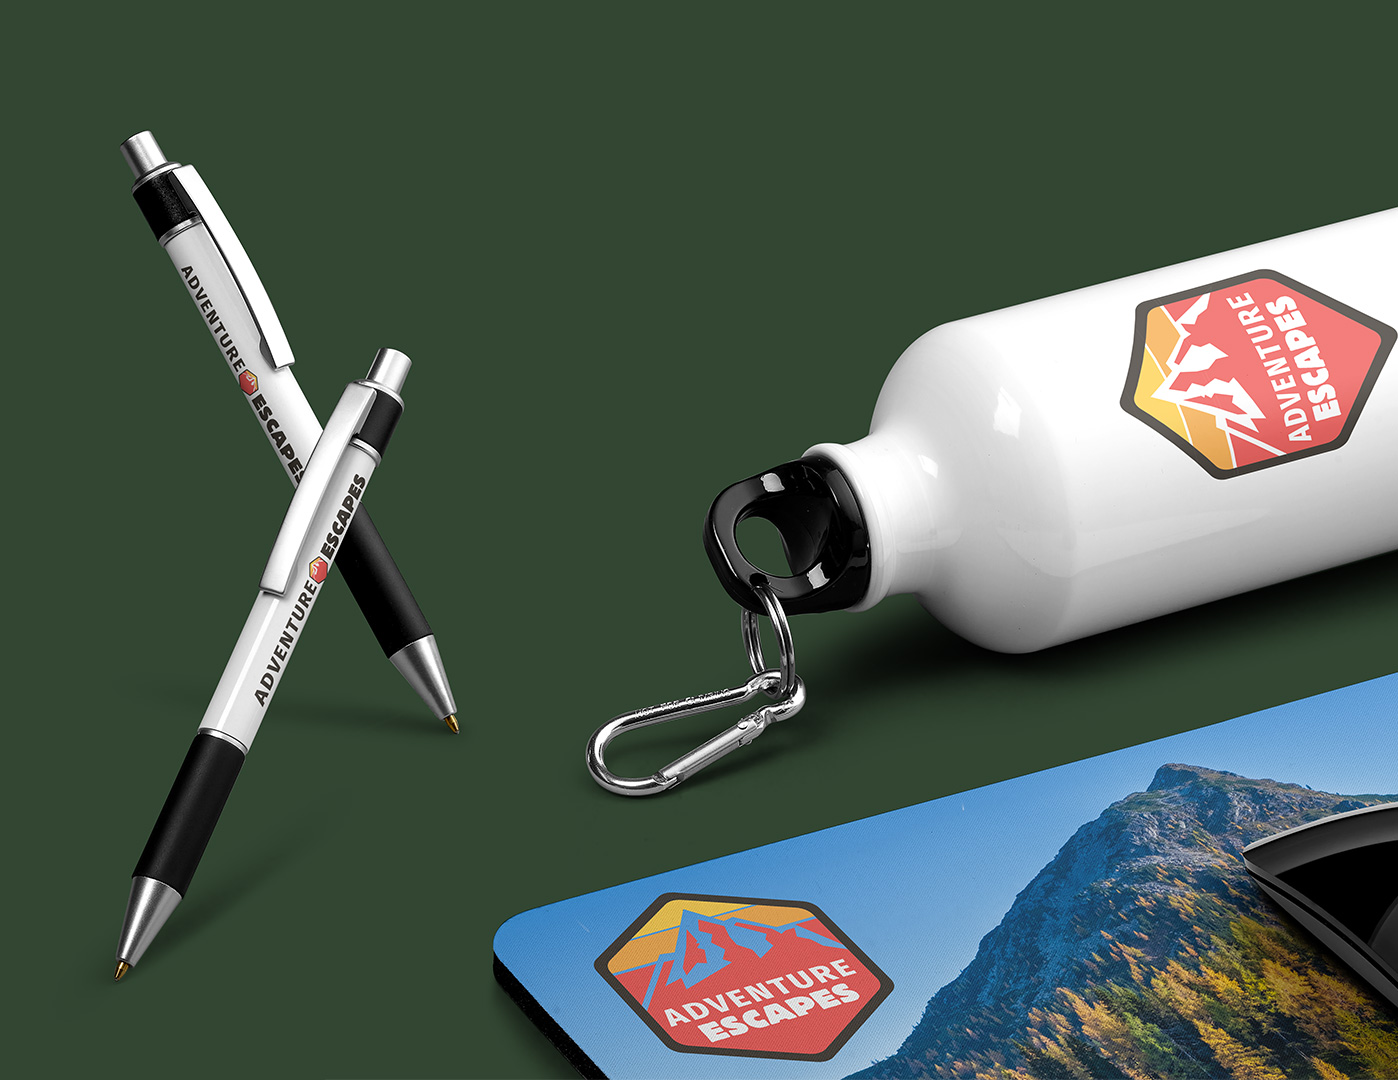 Selecting promotional products for your business